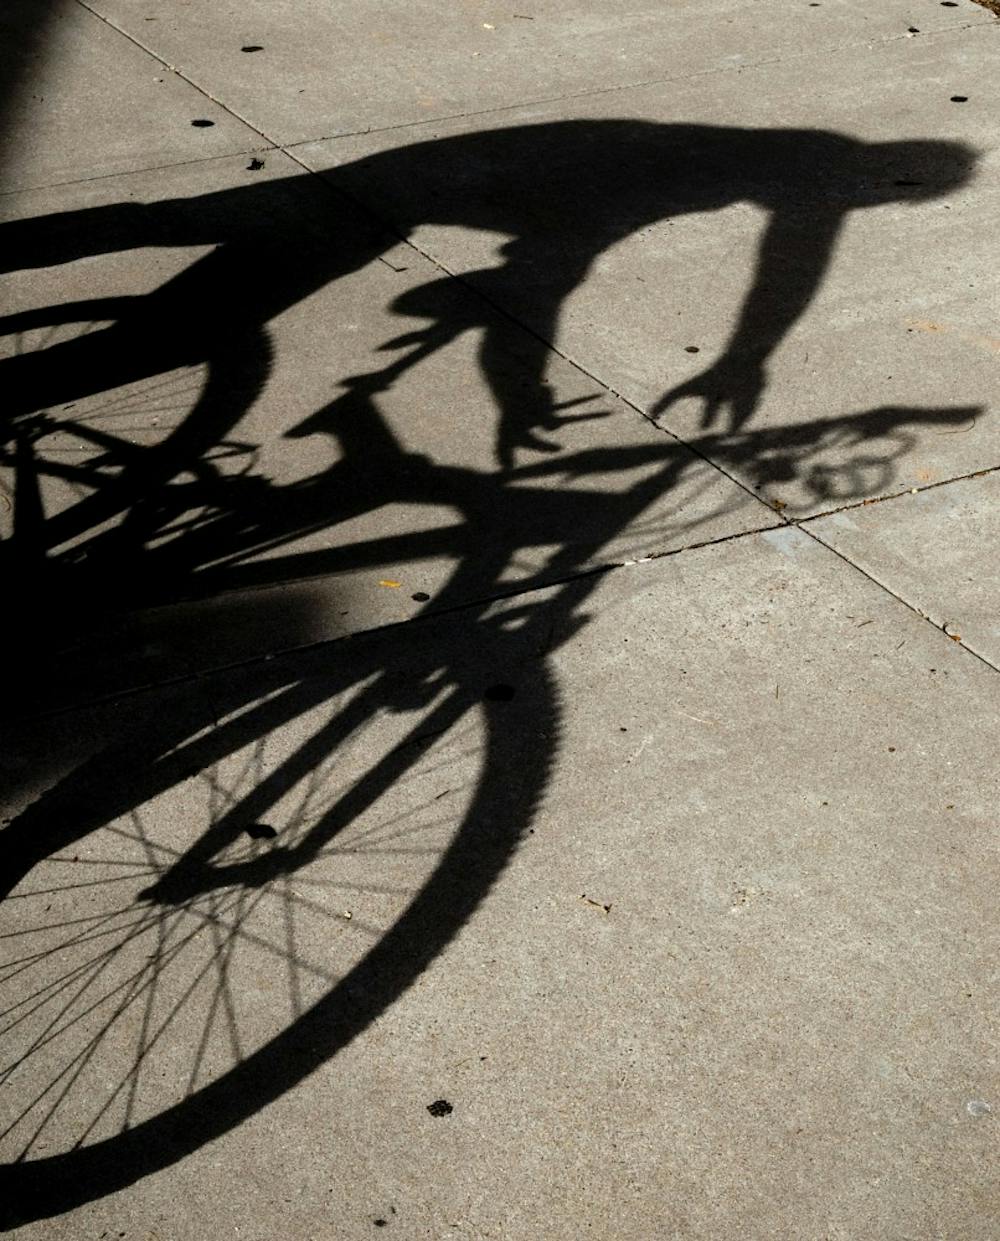 	In this photo illustration, a man attempts to steal a locked-up bicycle. Charles Gutierrez was arrested July 24 for stealing several bikes worth thousands of dollars in total from the UNM campus.